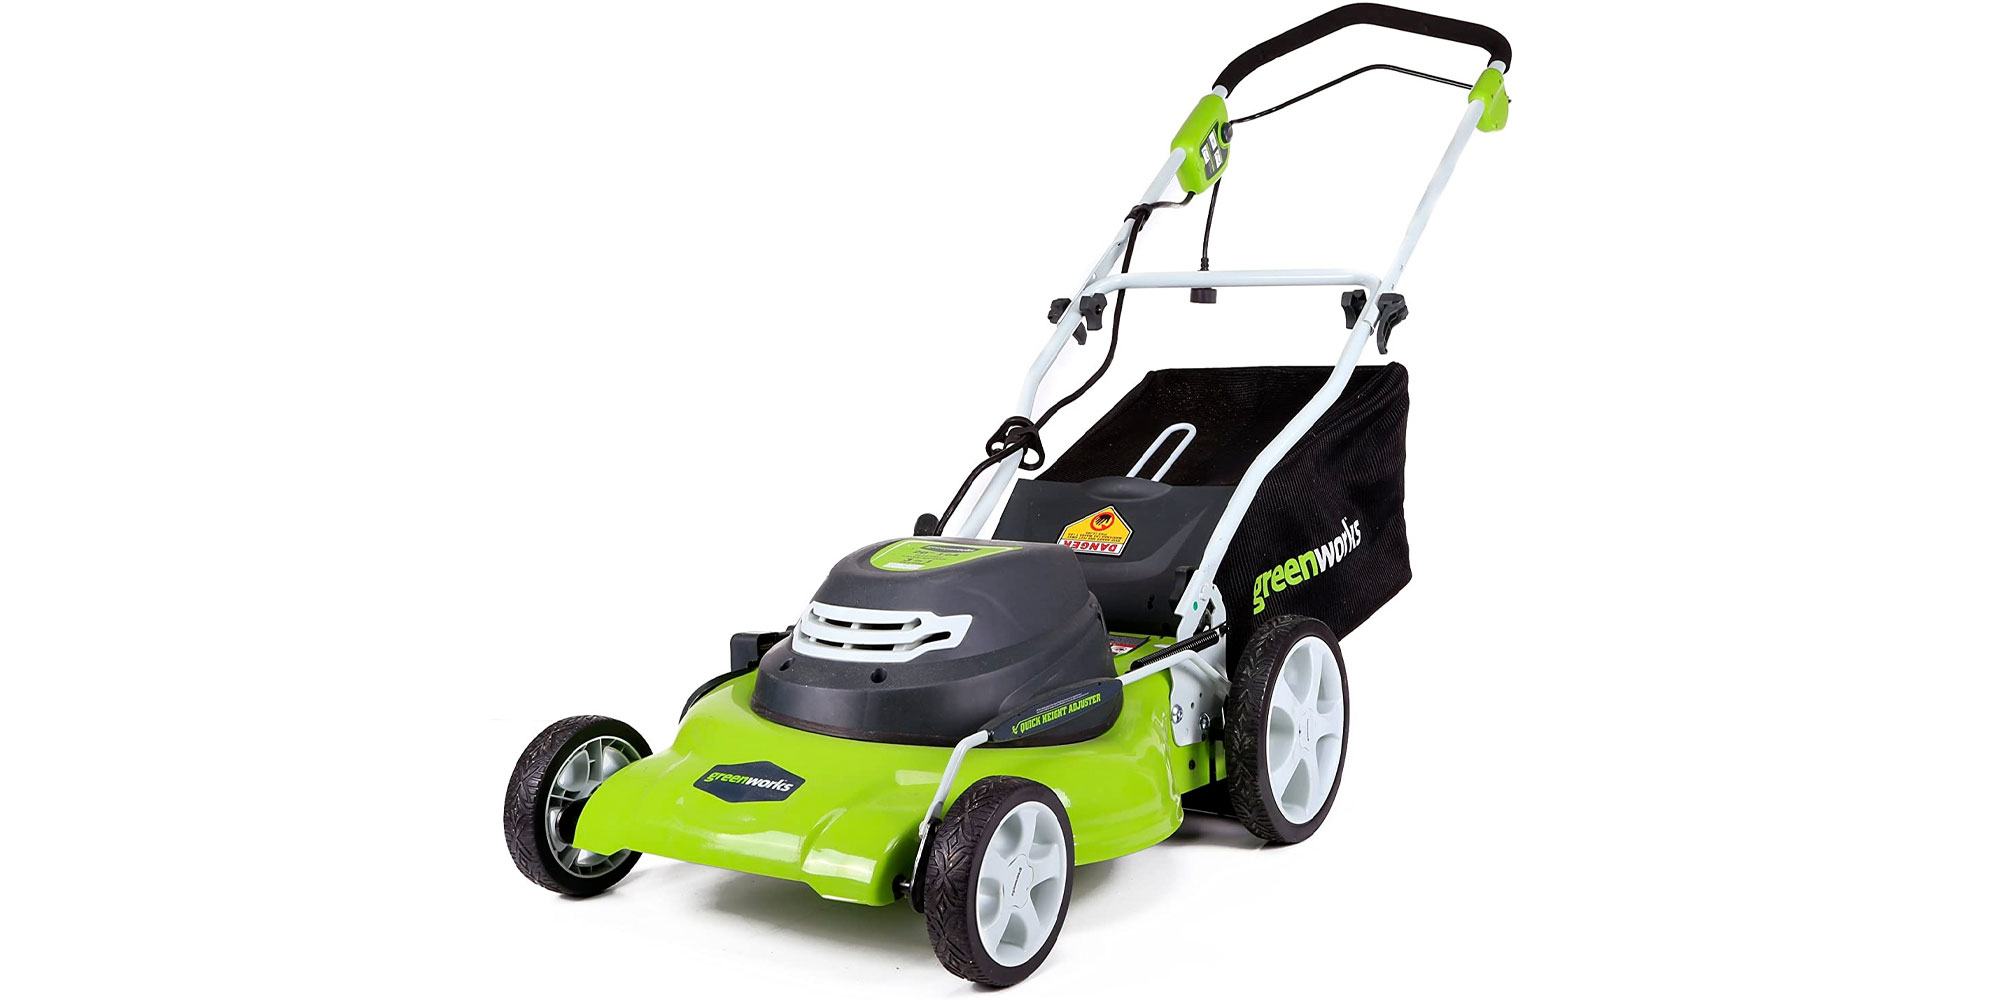 Tackle yard work with Greenworks’ electric mower at $143.50, more in today’s Green Deals